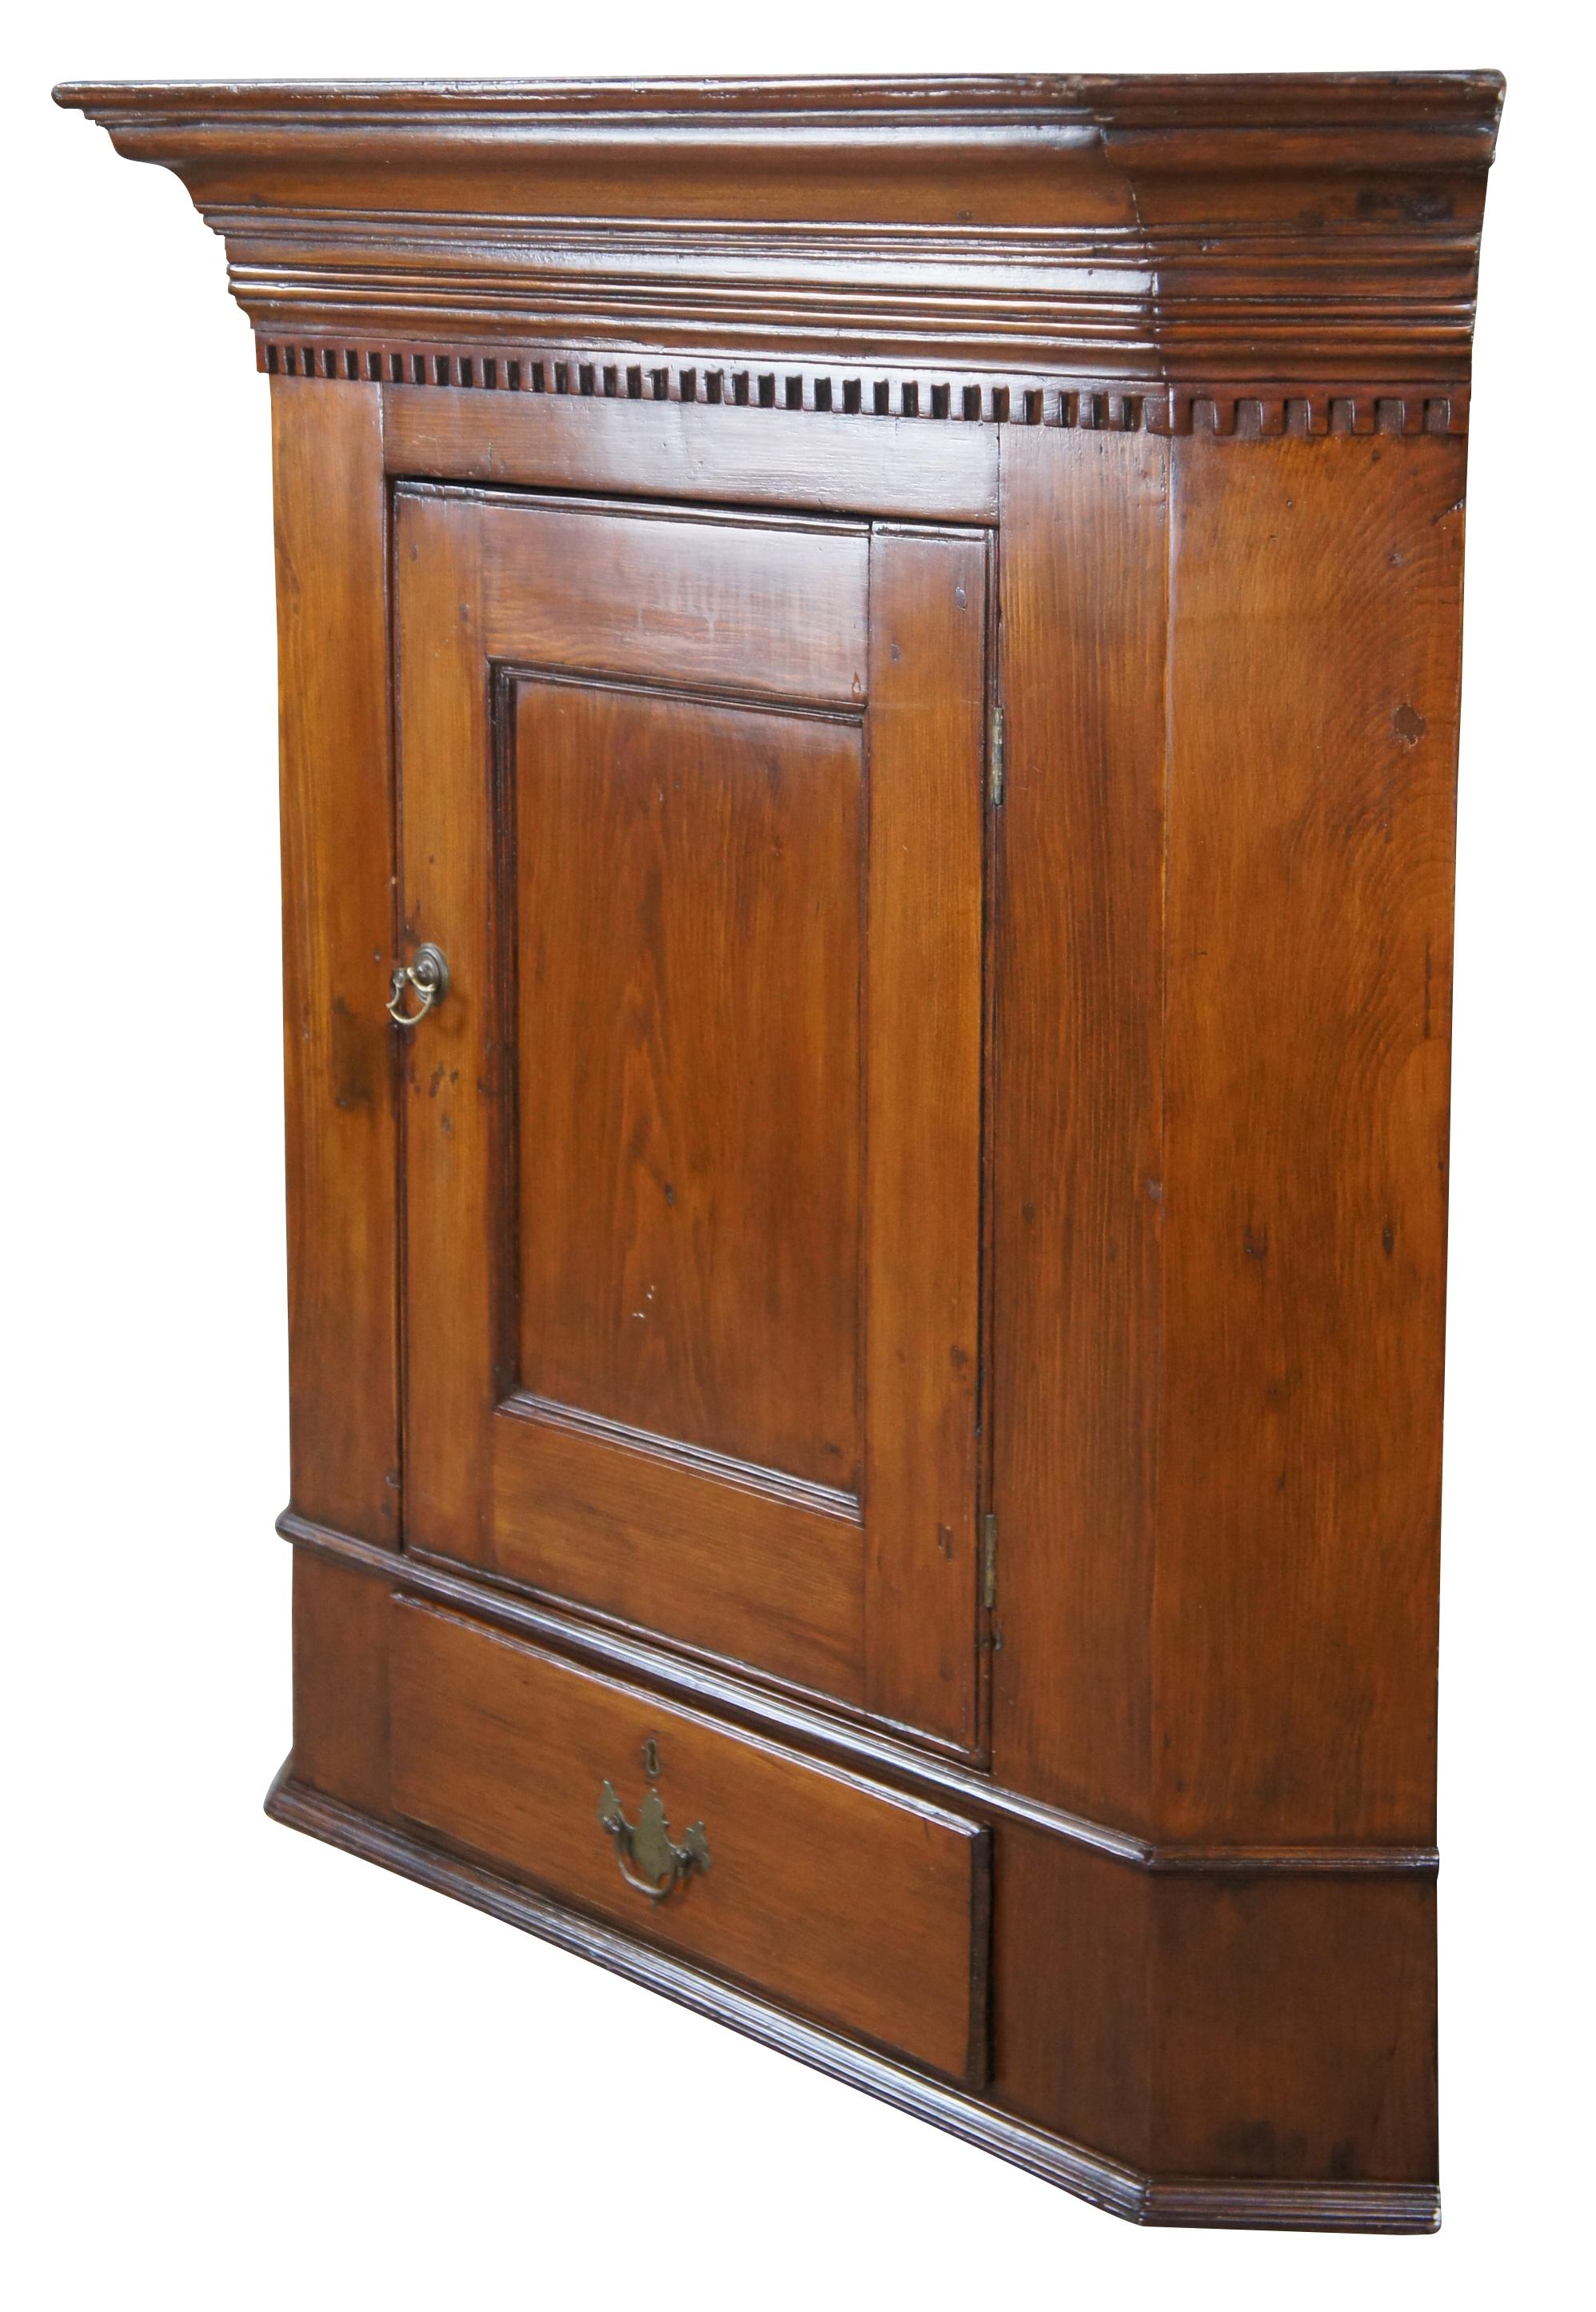 Antique Georgian corner cabinet.  Made of pine featuring ornate dentil crown molding with upper cabinet and lower hand dovetailed drawer.  Fitted with modern brass hardware from Ball & Ball of Whitford.

38